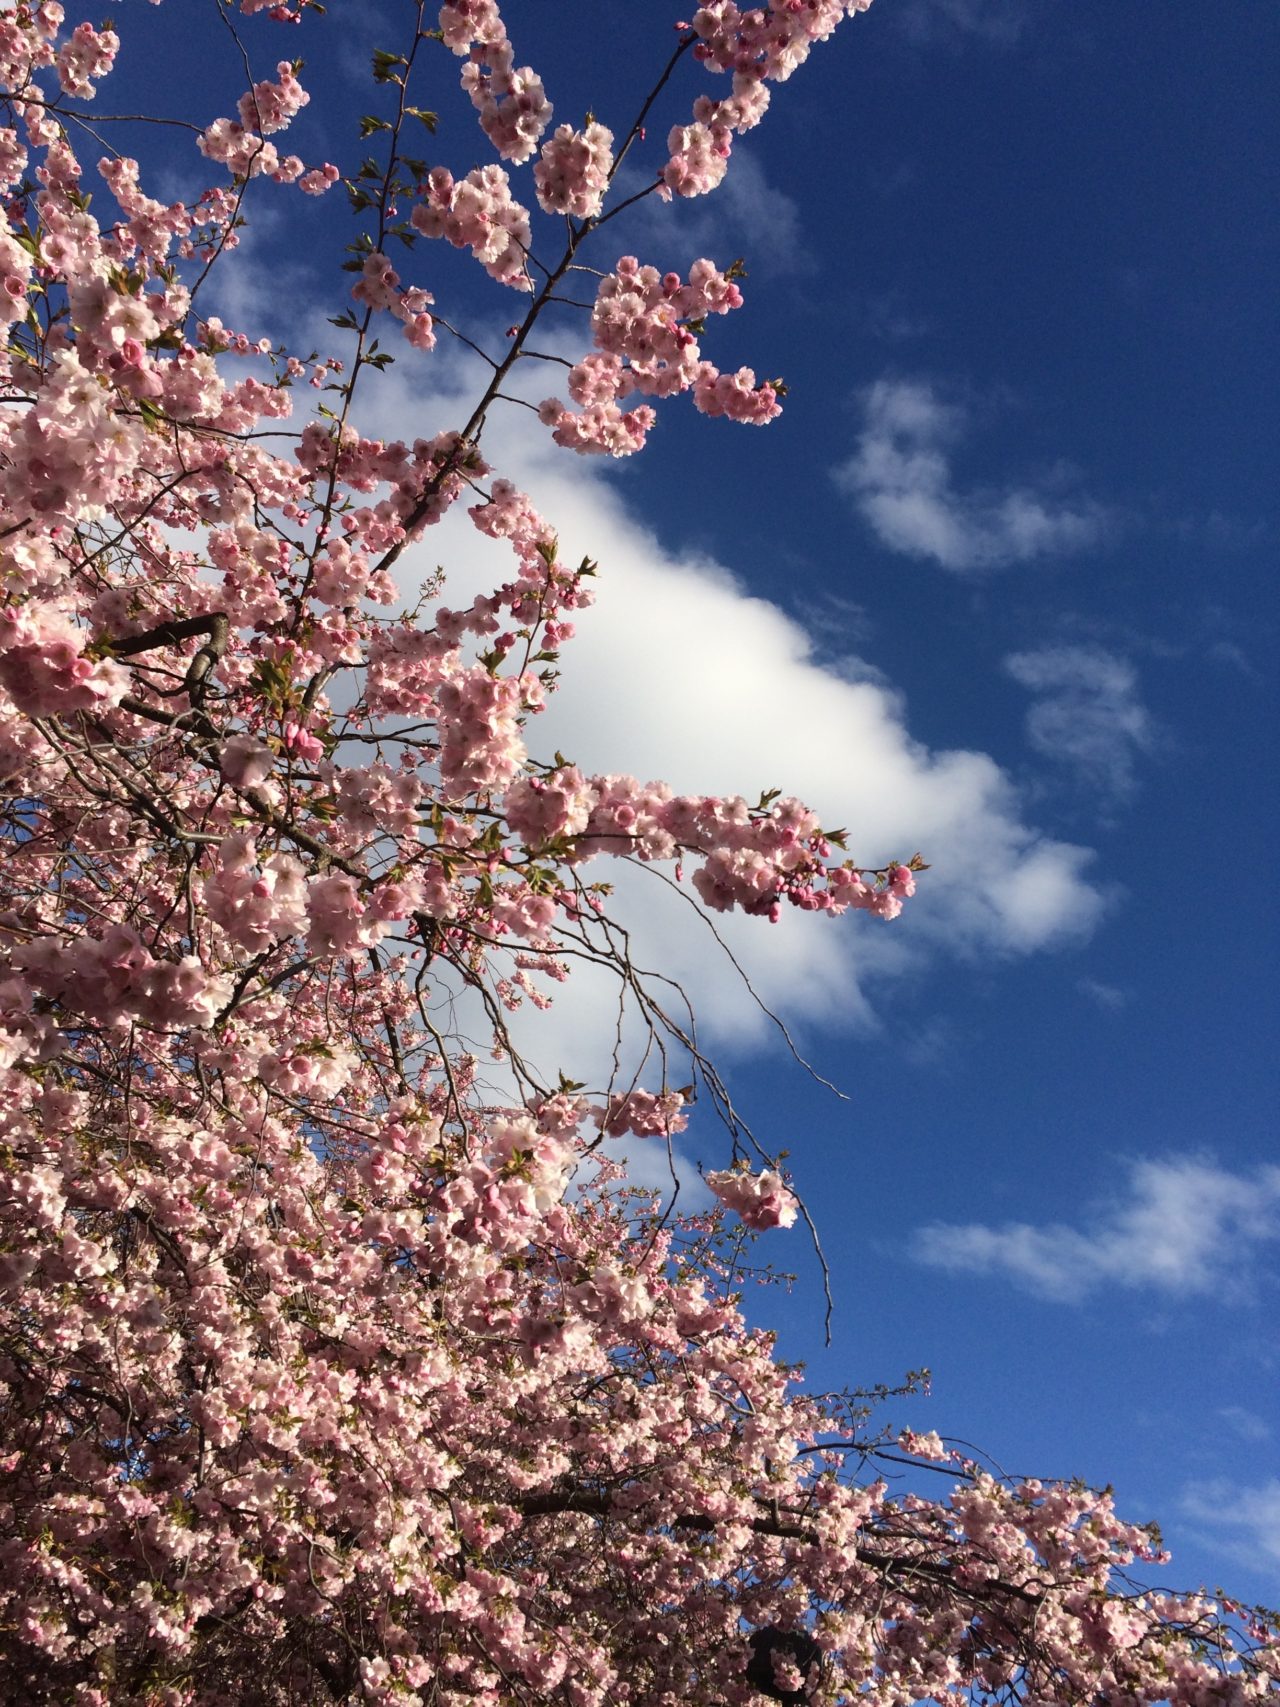 Blooming Trees With Blue Sky And Fluffy White Clouds In The Background